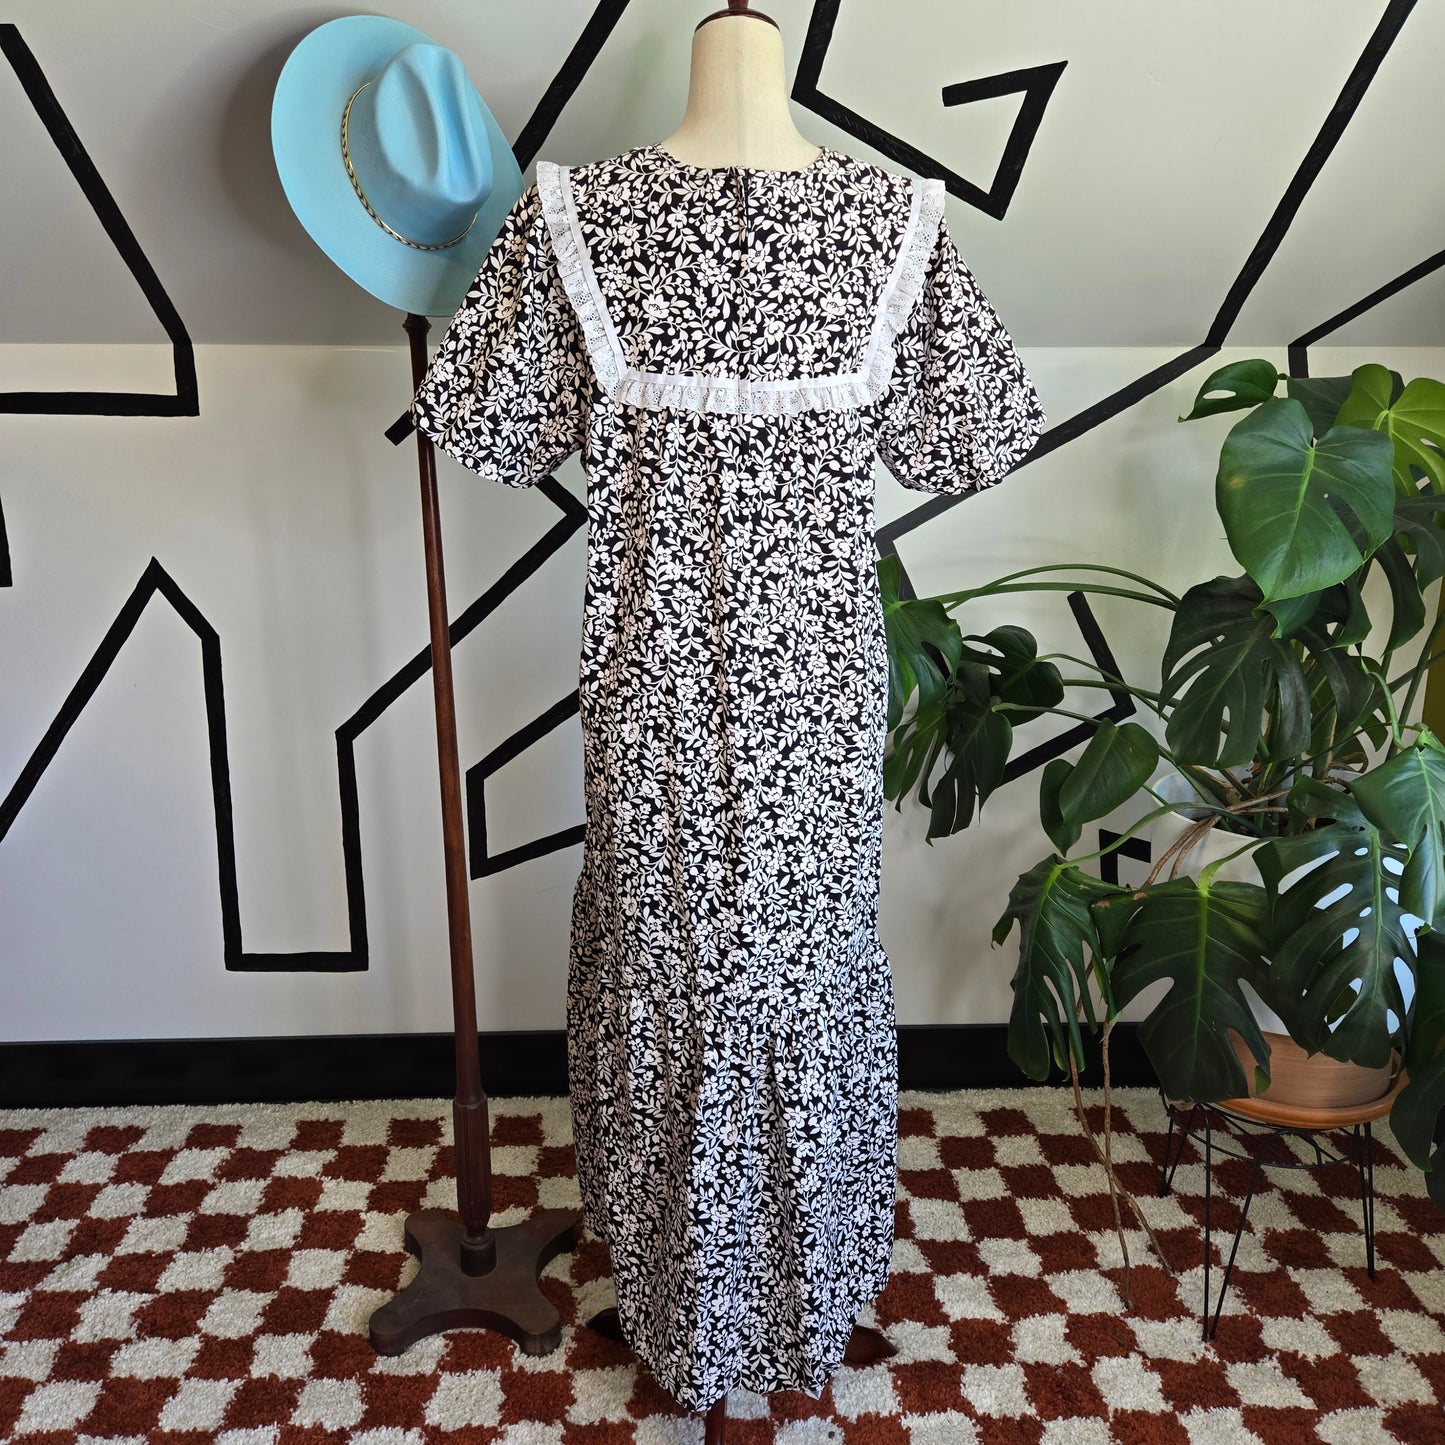 RM Made in Hawaii Vintage Black and White Floral Maxi Dress - XL